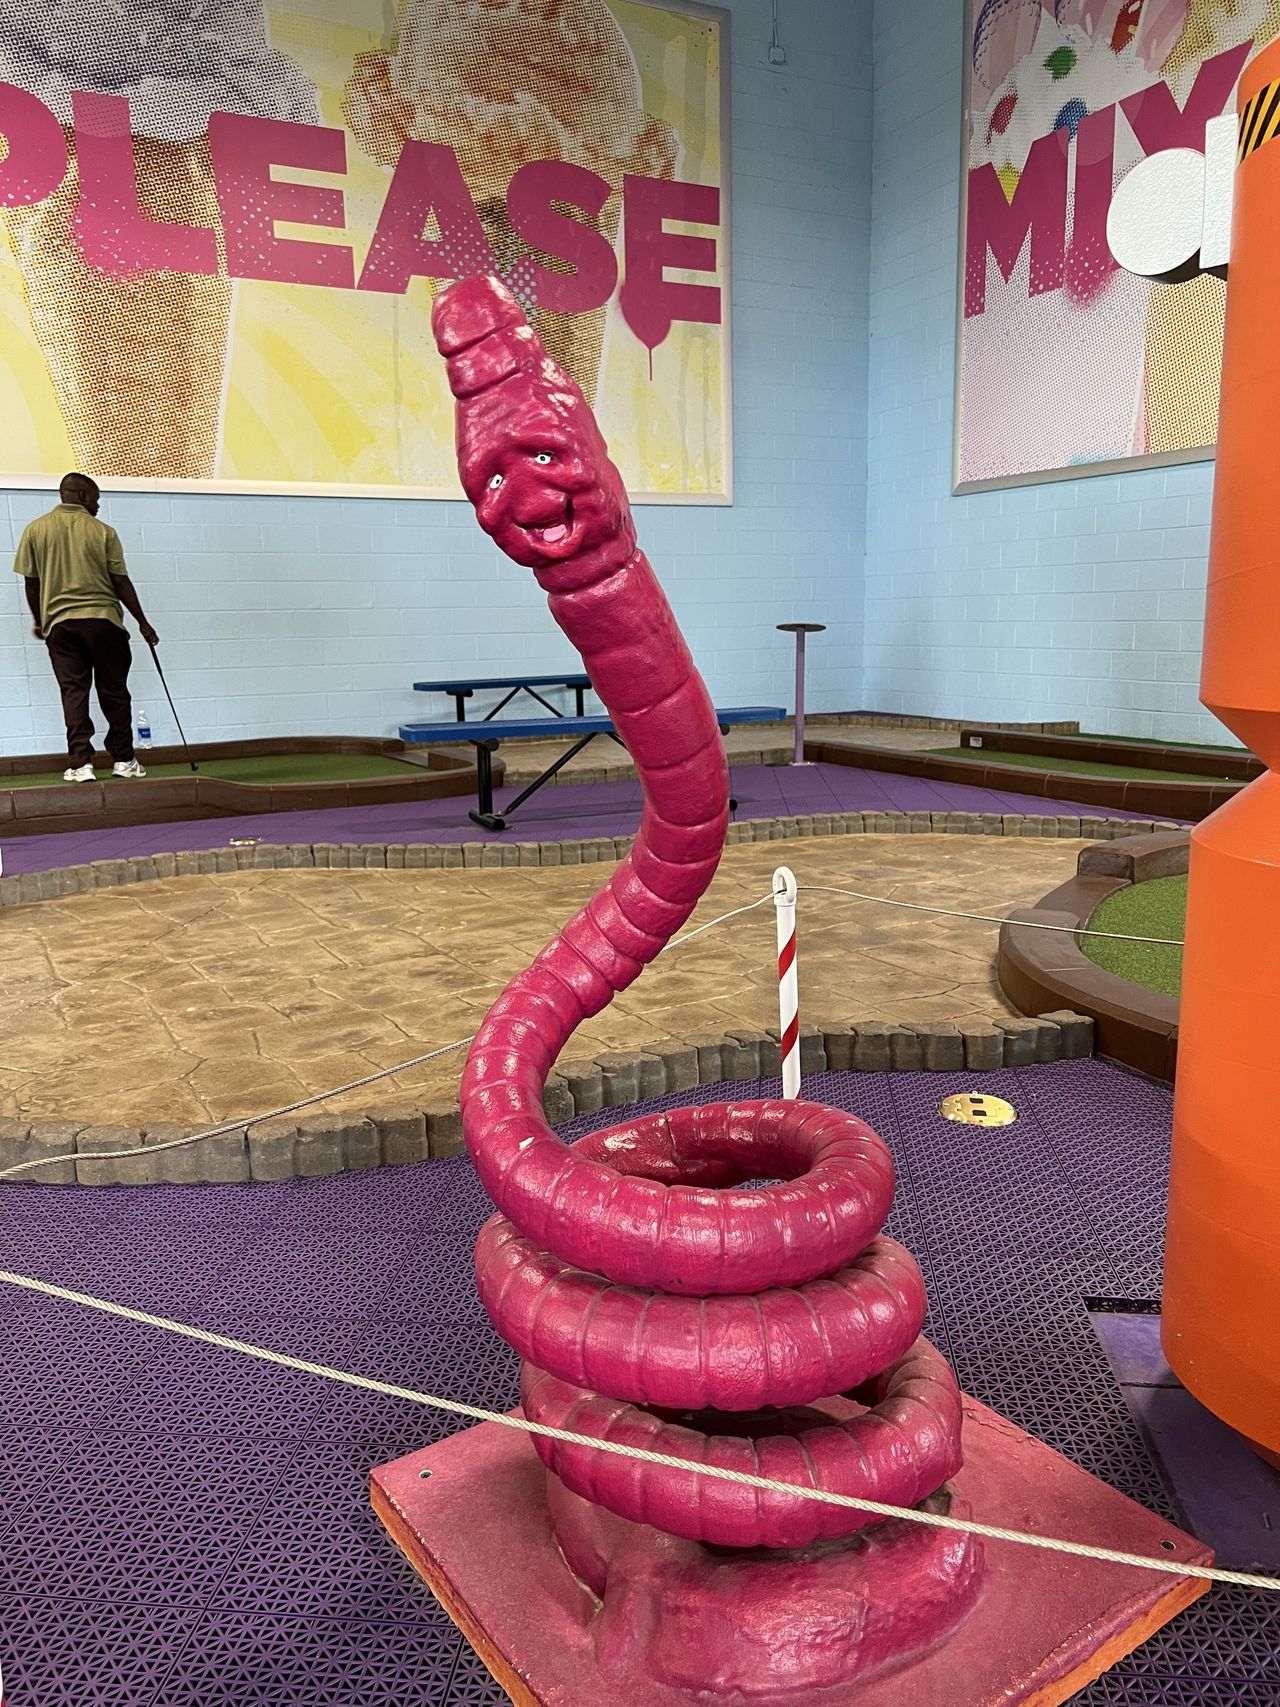 wtf mini golf place? this is creepy!